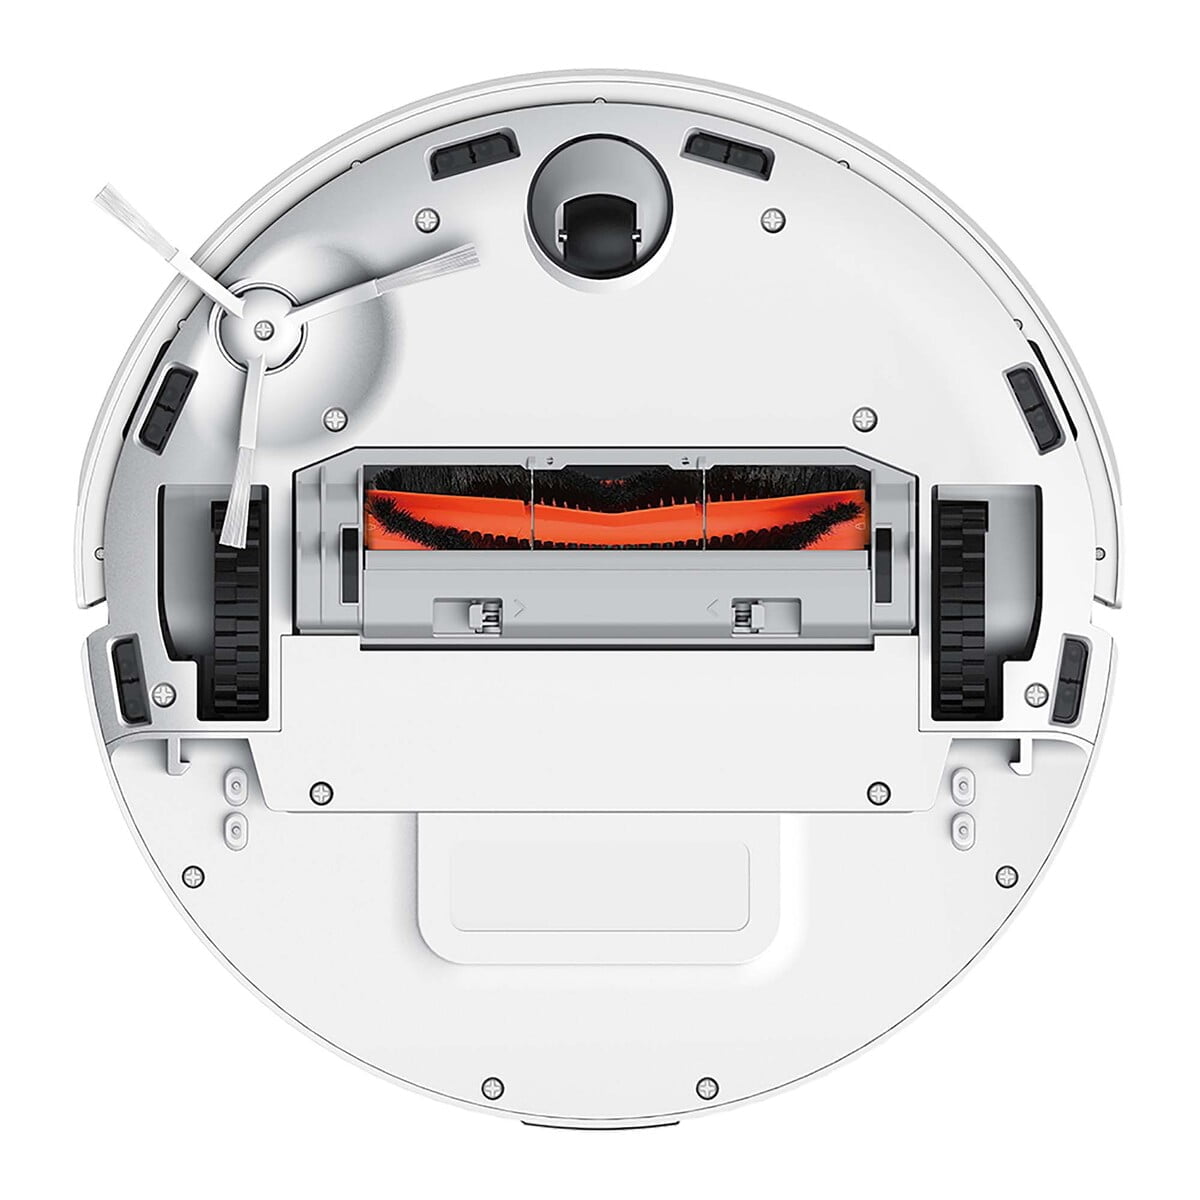 1920754 05 Xiaomi &Lt;H1&Gt;Mi Robot Vacuum-Mop 2 Pro - White&Lt;/H1&Gt; Https://Www.youtube.com/Watch?V=Bhyl5Eqaivw &Lt;Span Class=&Quot;Xm-Text &Quot; Data-Key=&Quot;Note_1&Quot; Data-Type=&Quot;Text&Quot; Data-Id=&Quot;7A46A86Df8&Quot;&Gt;*10,000 Vibrations Per Minute: By Testing The Ambient Noise When The Water Tank Was Not Vibrating, Testing Noise When The Water Tank Was Vibrating Normally, Determining The Level Of Machine Noise Through Small Waves, And Adding The Frequency Domain Analysis For The Specified Area To Obtain A Spectrum Of Two Sound Segments, The Water Tank Vibration Frequency Was Determined And Converted To The Number Of Vibrations Per Minute. By Comparing The Background Noise, The Water Tank Generated A Peak Noise Of 208Hz When Vibrating. Therefore, The Water Tank Actually Vibrated At 208Hz, Or 12,500 Vibrations/Min.&Lt;/Span&Gt;&Lt;Span Class=&Quot;Xm-Text &Quot; Data-Key=&Quot;Note_2&Quot; Data-Type=&Quot;Text&Quot; Data-Id=&Quot;004F9Bee71&Quot;&Gt;*3000Pa &Lt;/Span&Gt; Mi Robot Vacuum Mi Robot Vacuum-Mop 2 Pro - White